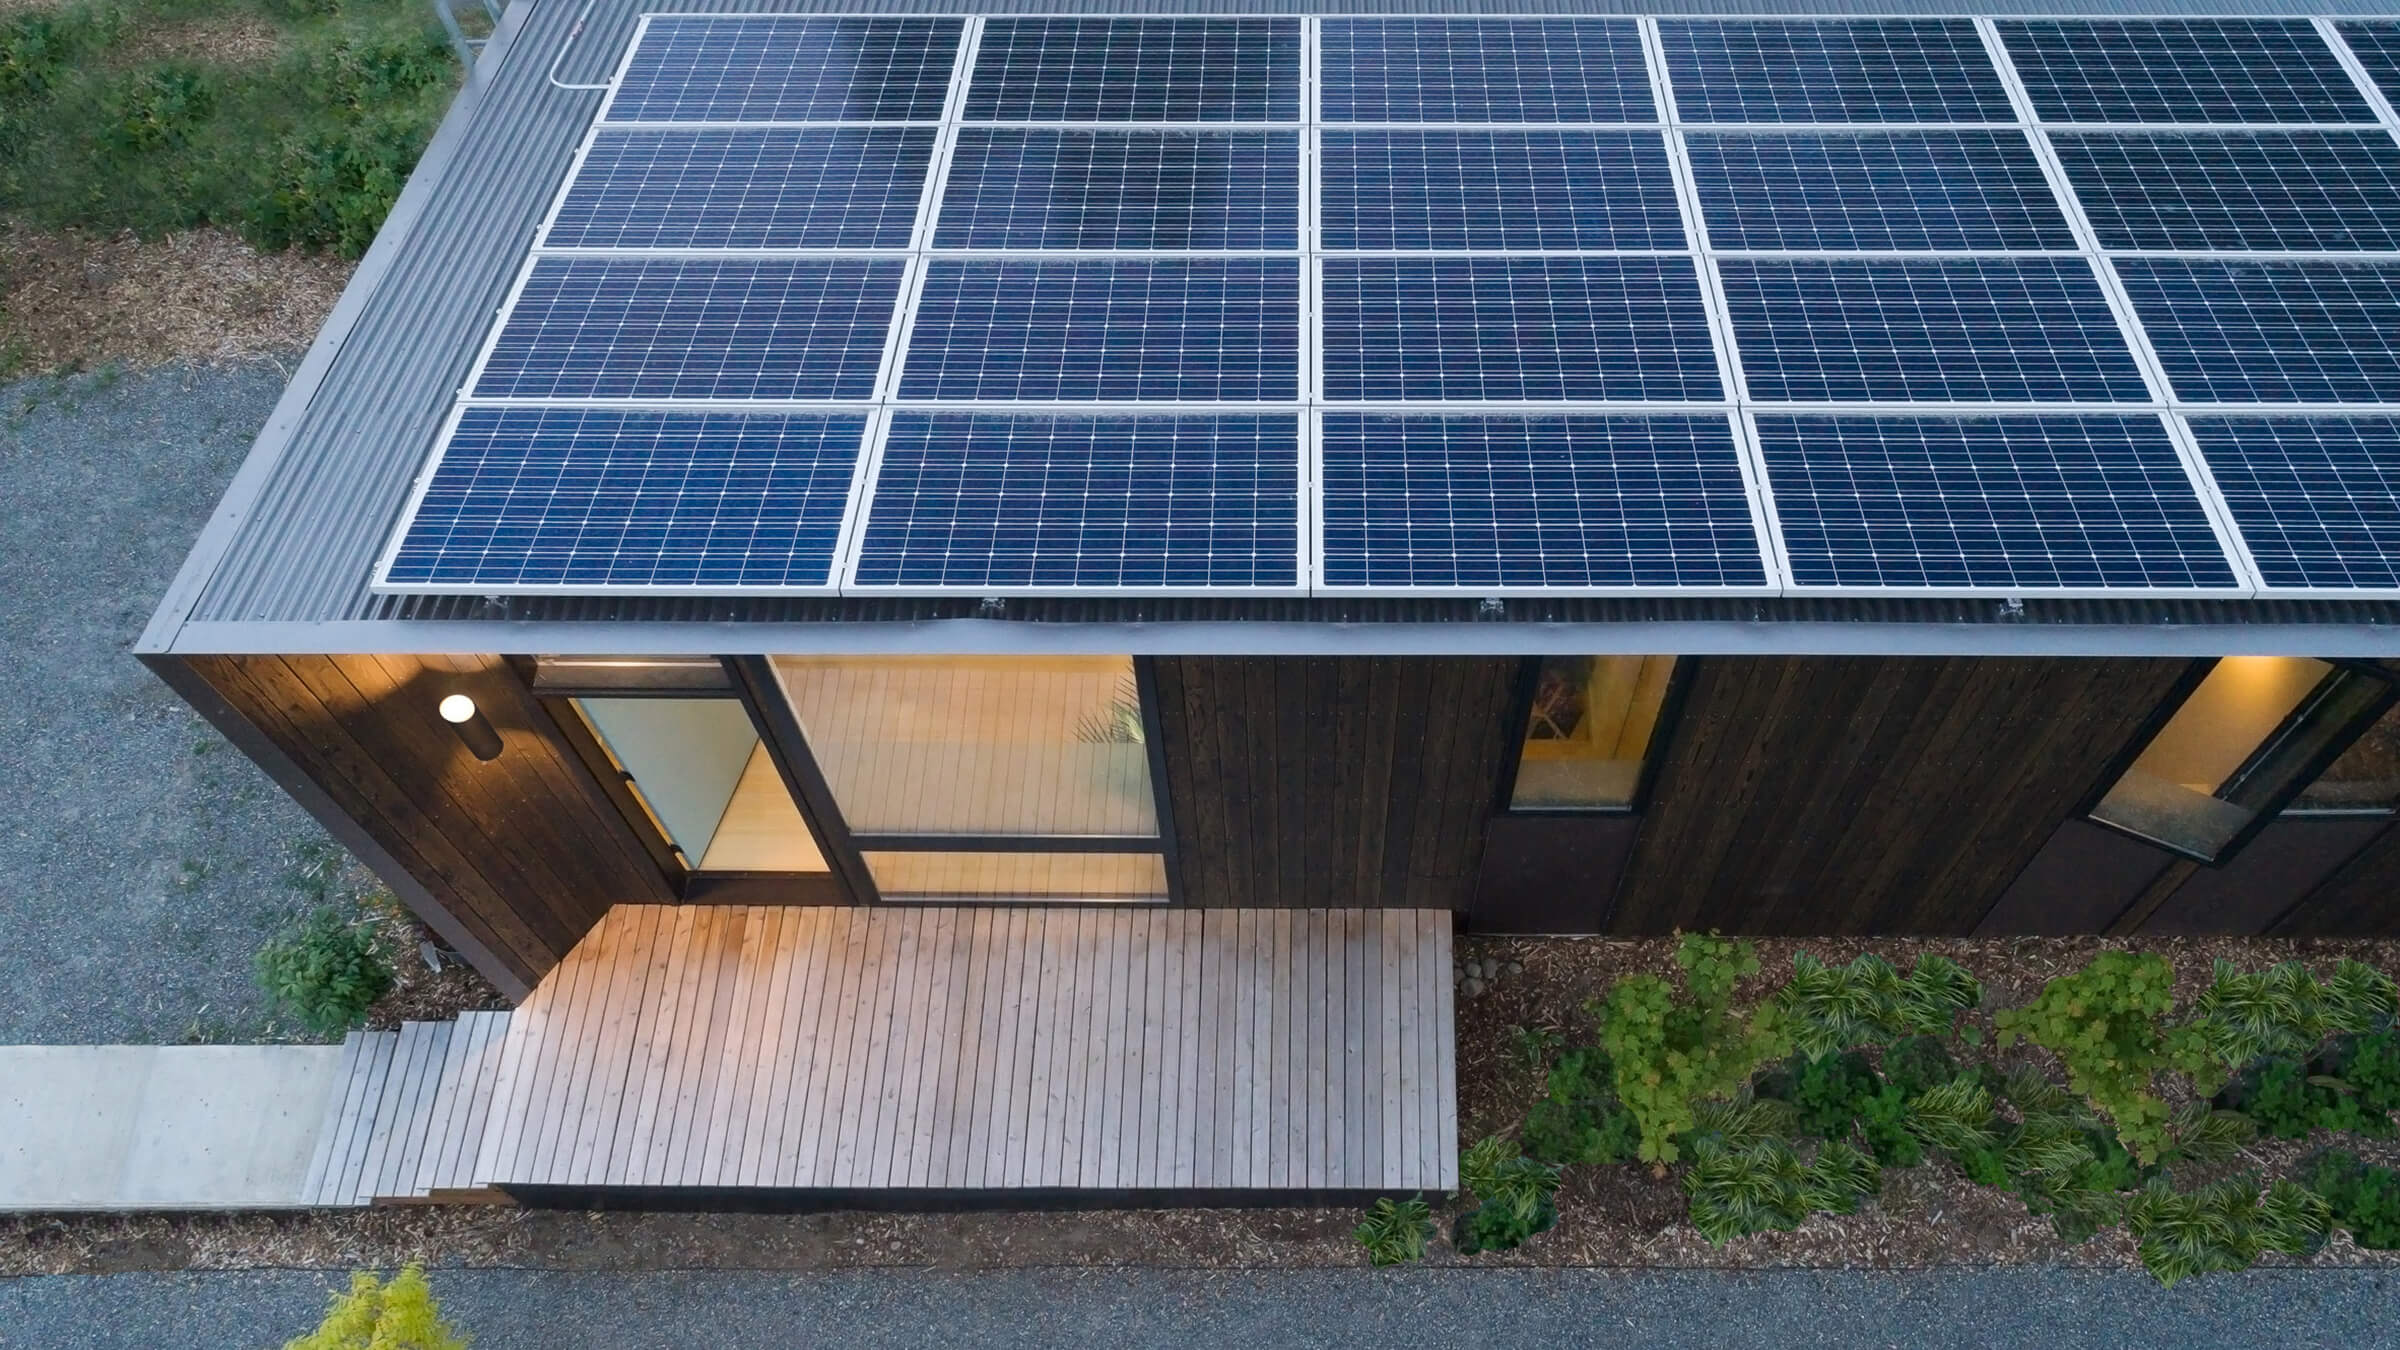 Going Solar: Curbed by Curb Appeal?